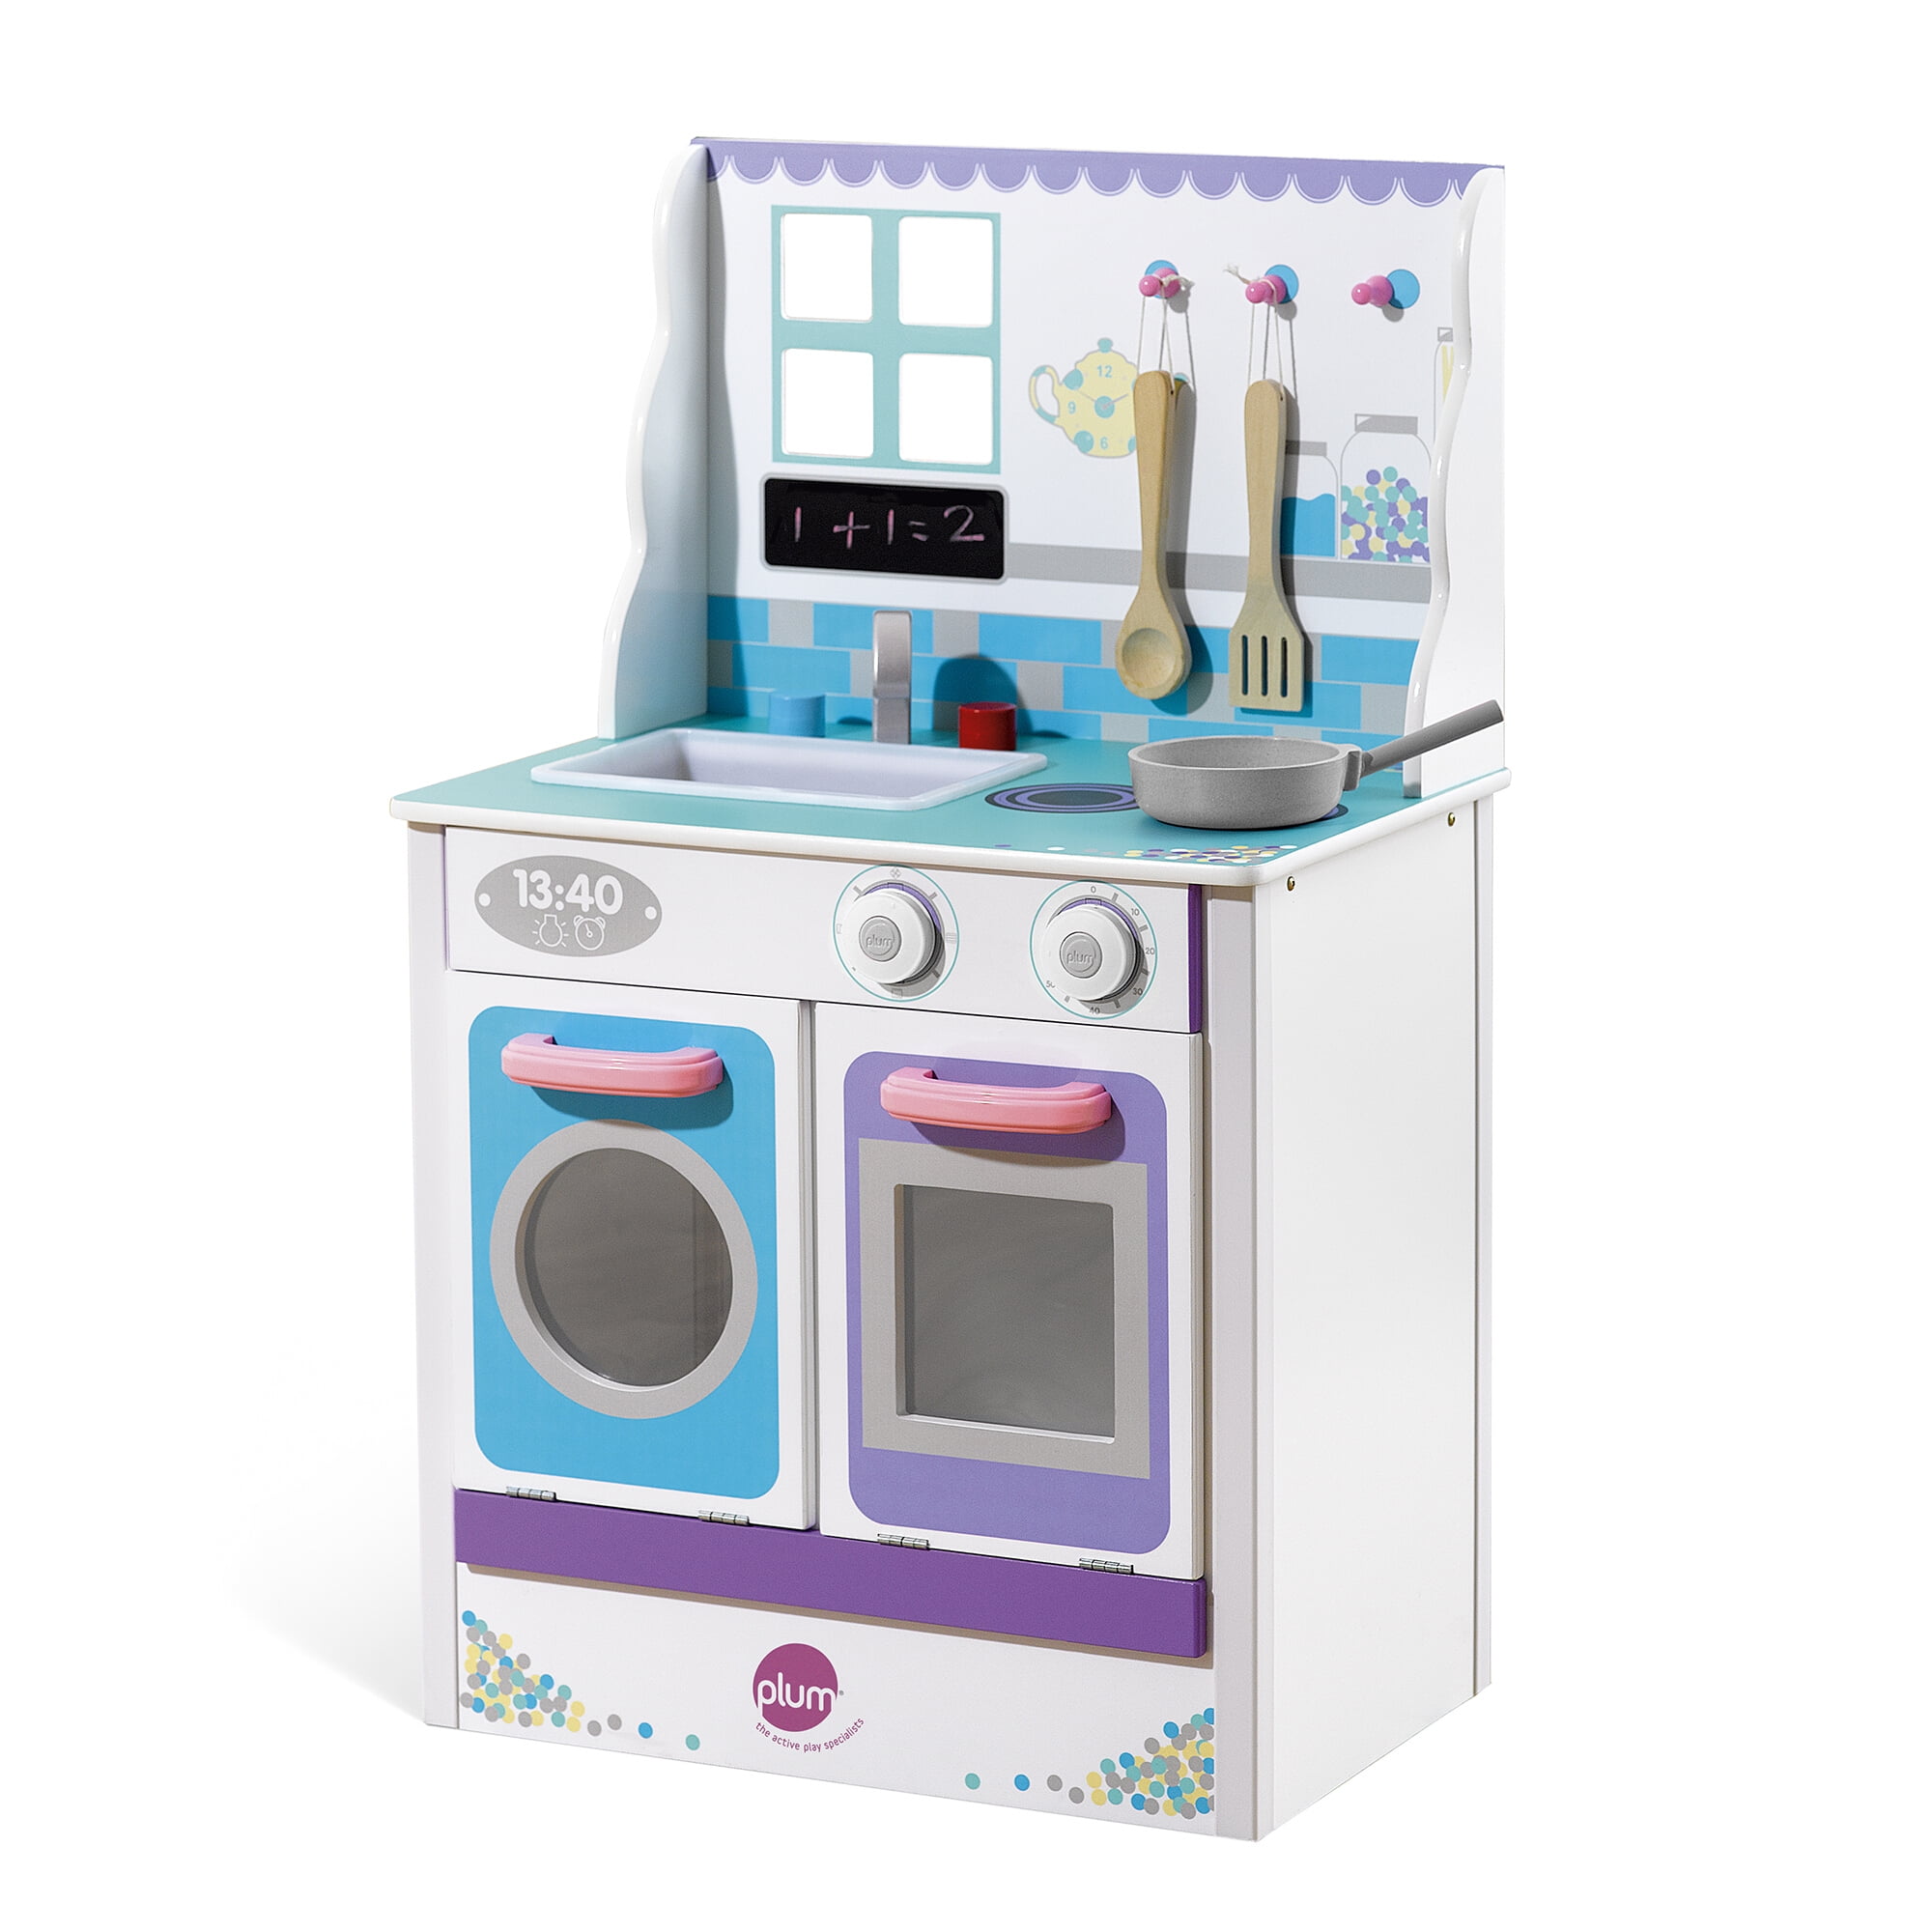 Pro tip: play kitchens with plastic play sink are your best option! Many play  kitchens have wooden sink and that would get destroyed so…